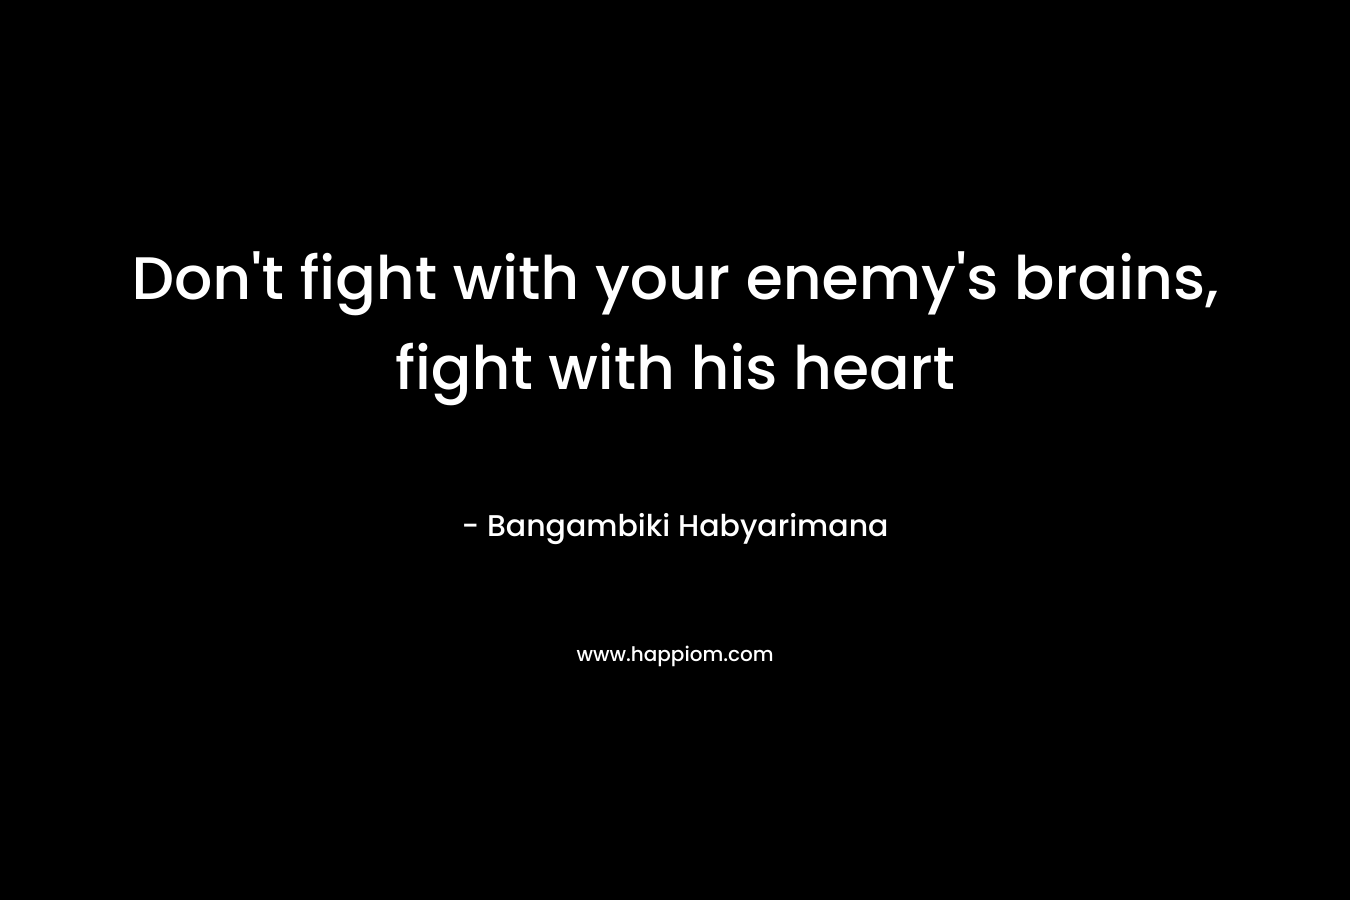 Don’t fight with your enemy’s brains, fight with his heart – Bangambiki Habyarimana